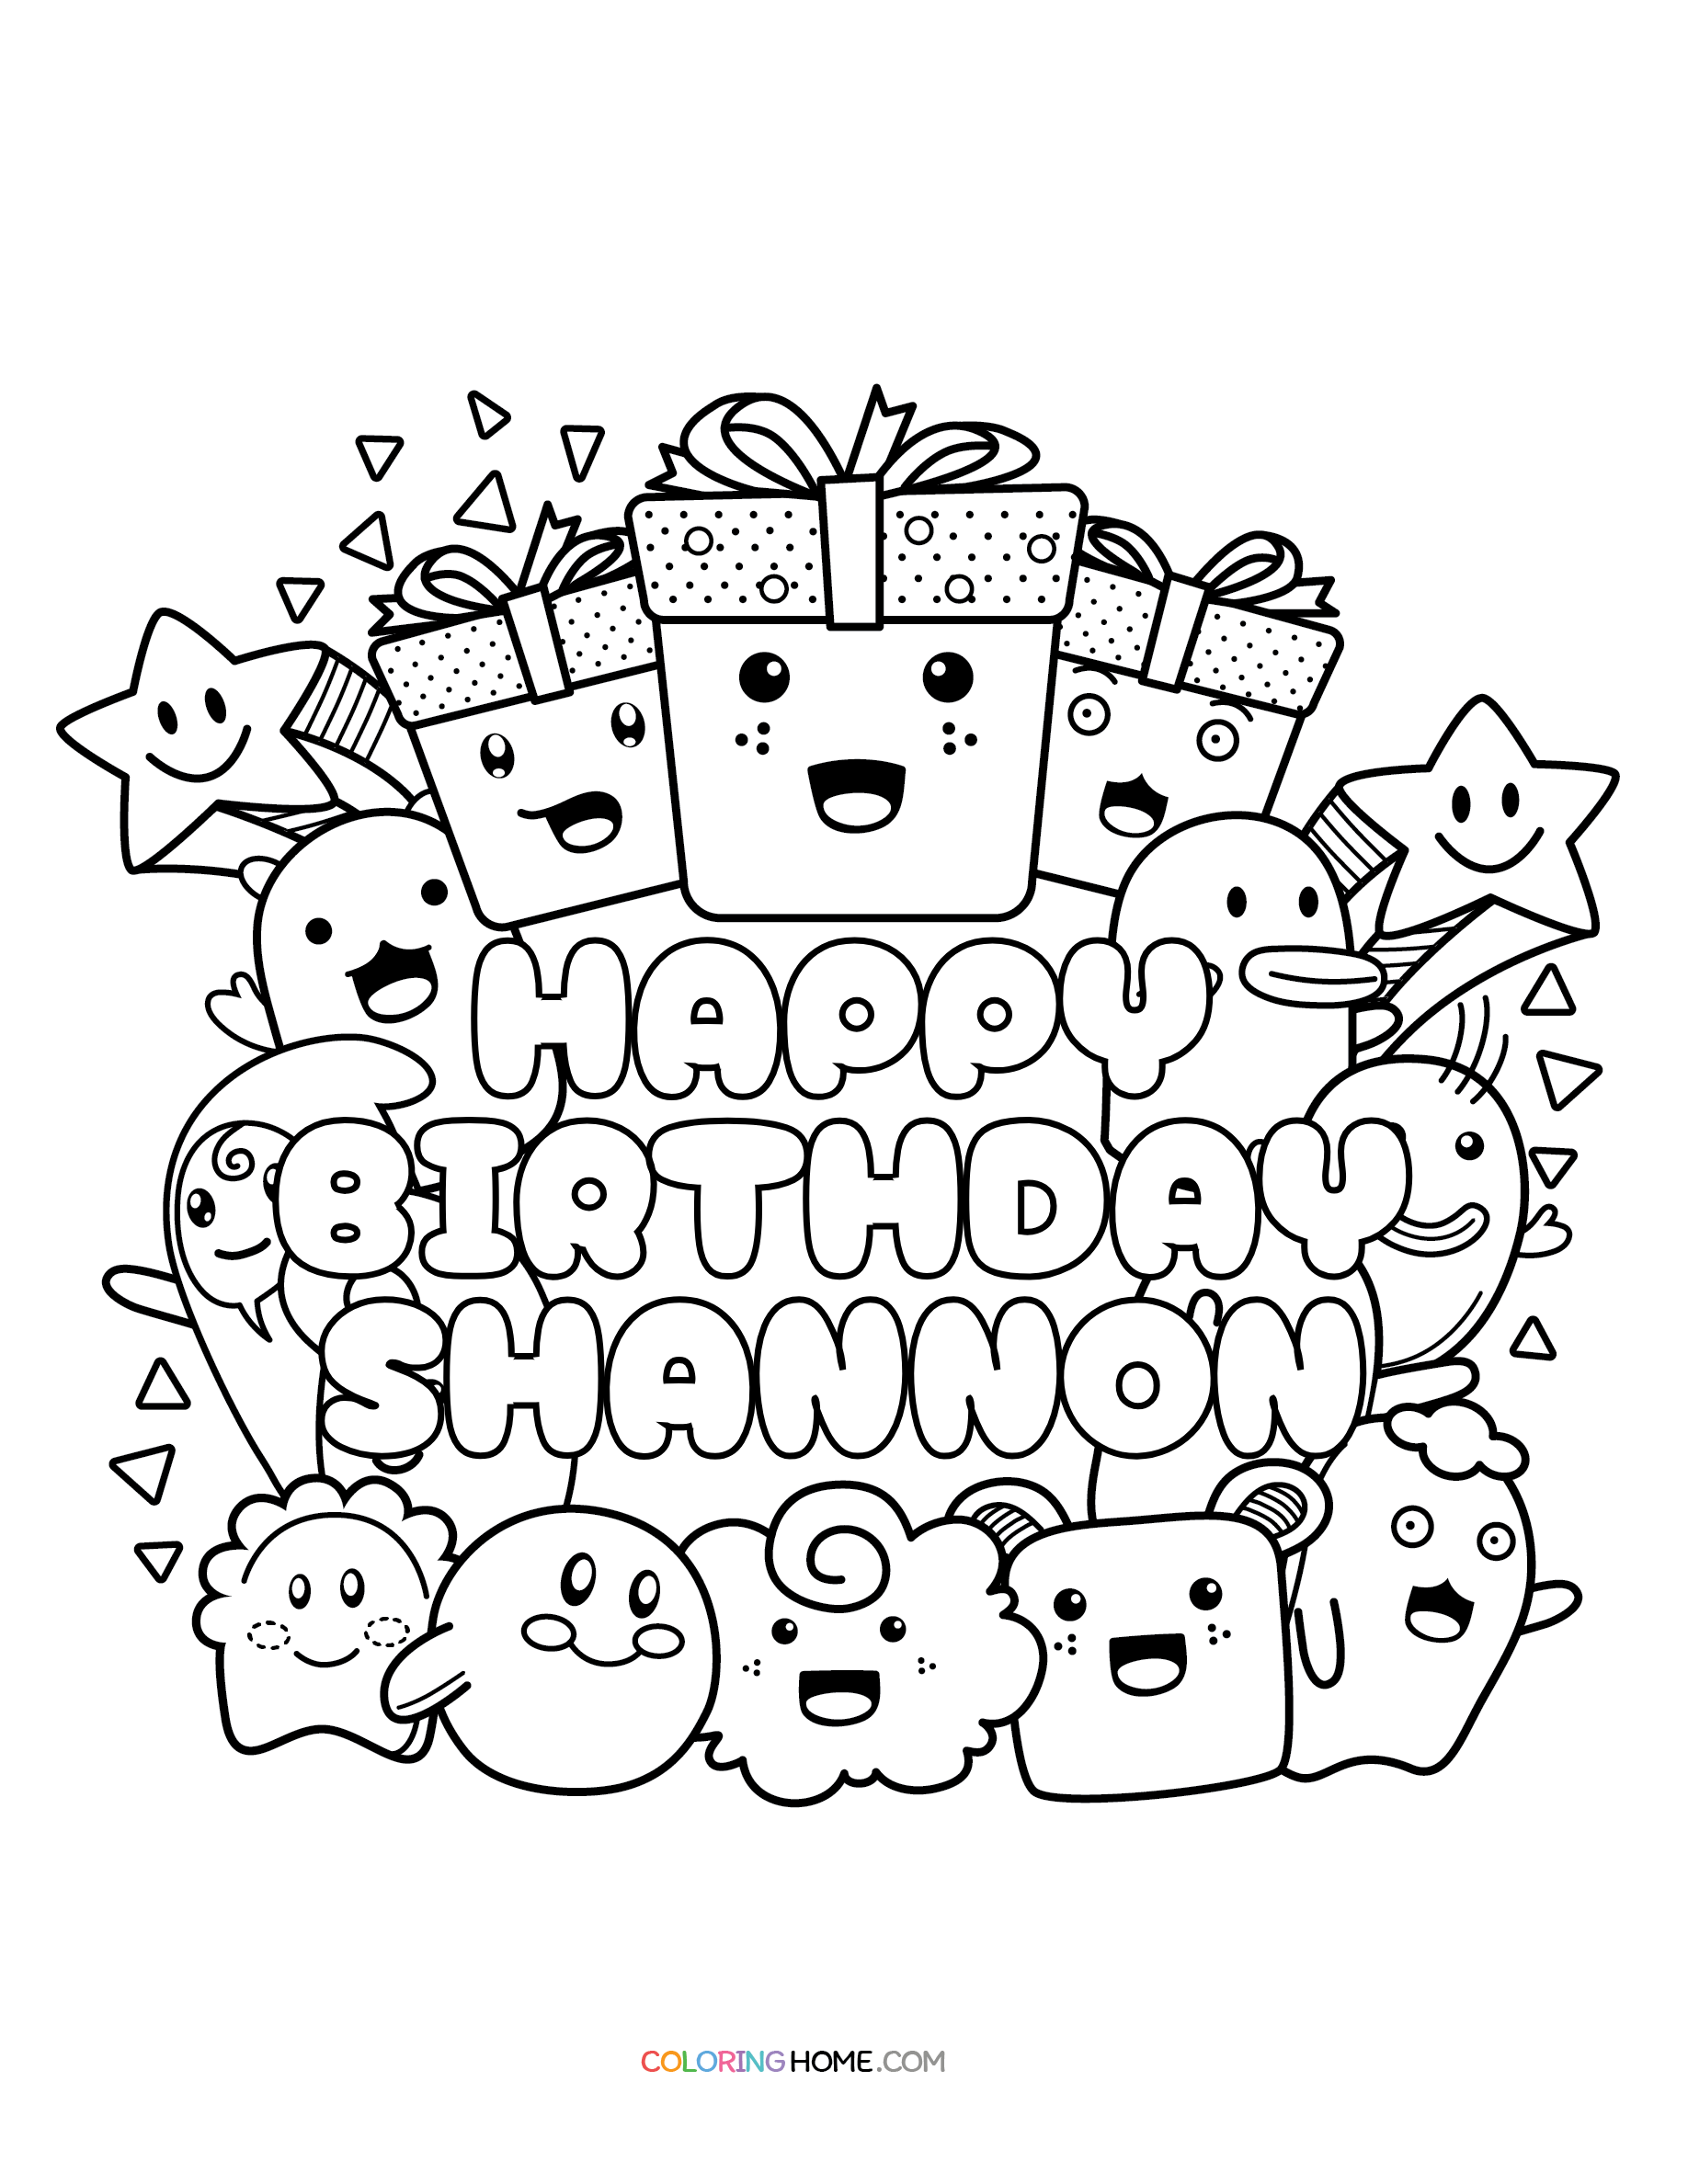 Happy Birthday Shannon coloring page